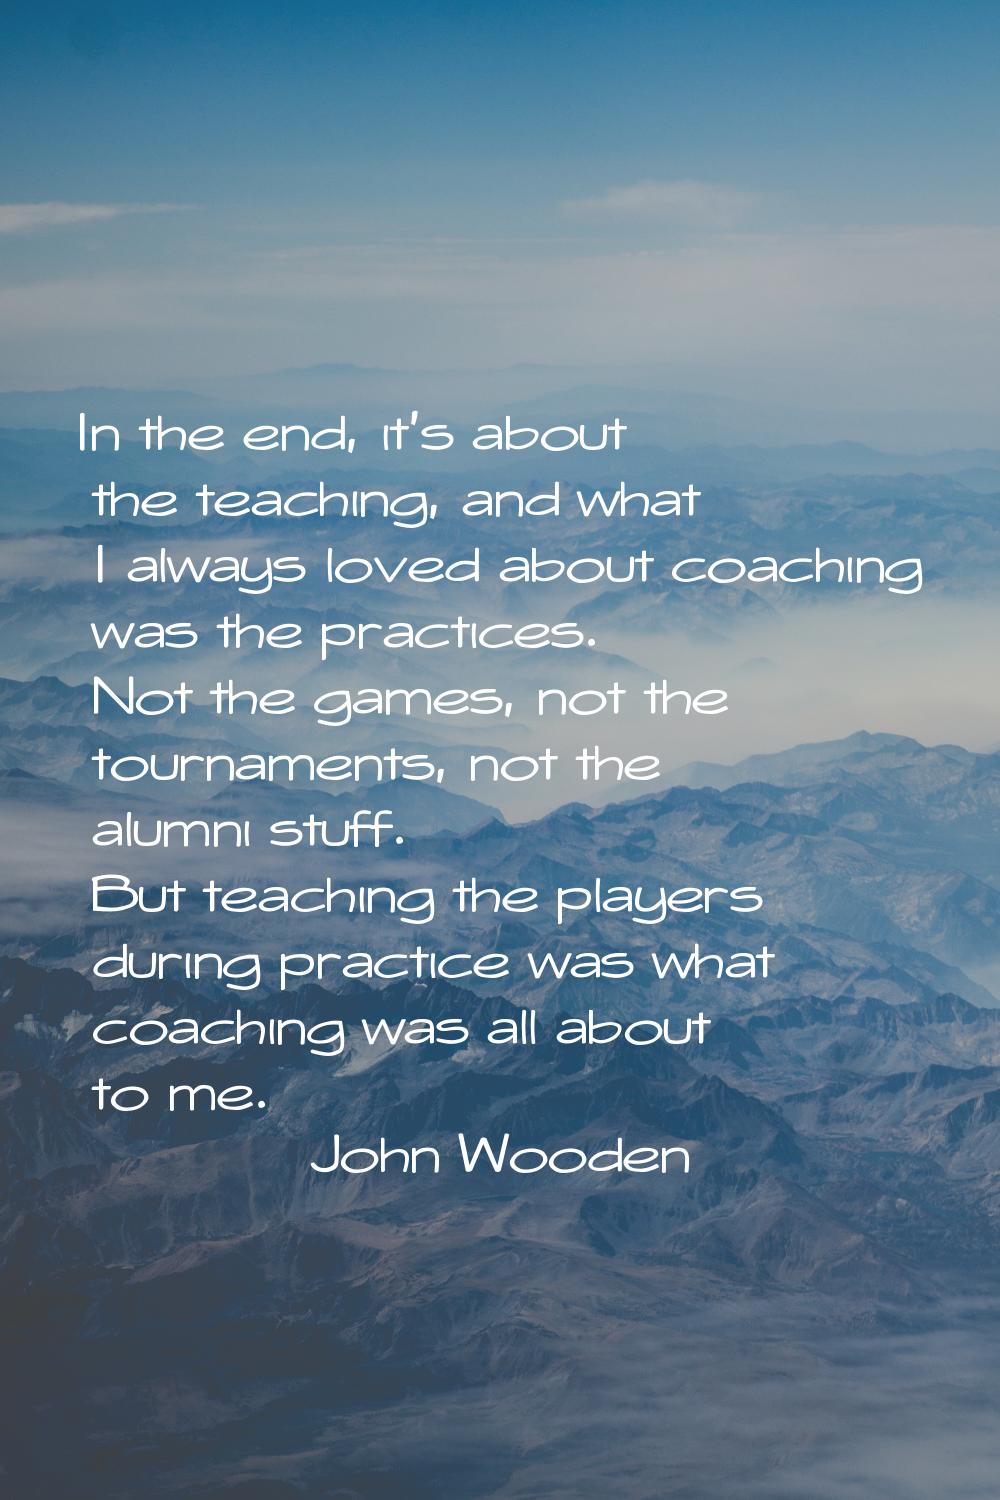 In the end, it's about the teaching, and what I always loved about coaching was the practices. Not 